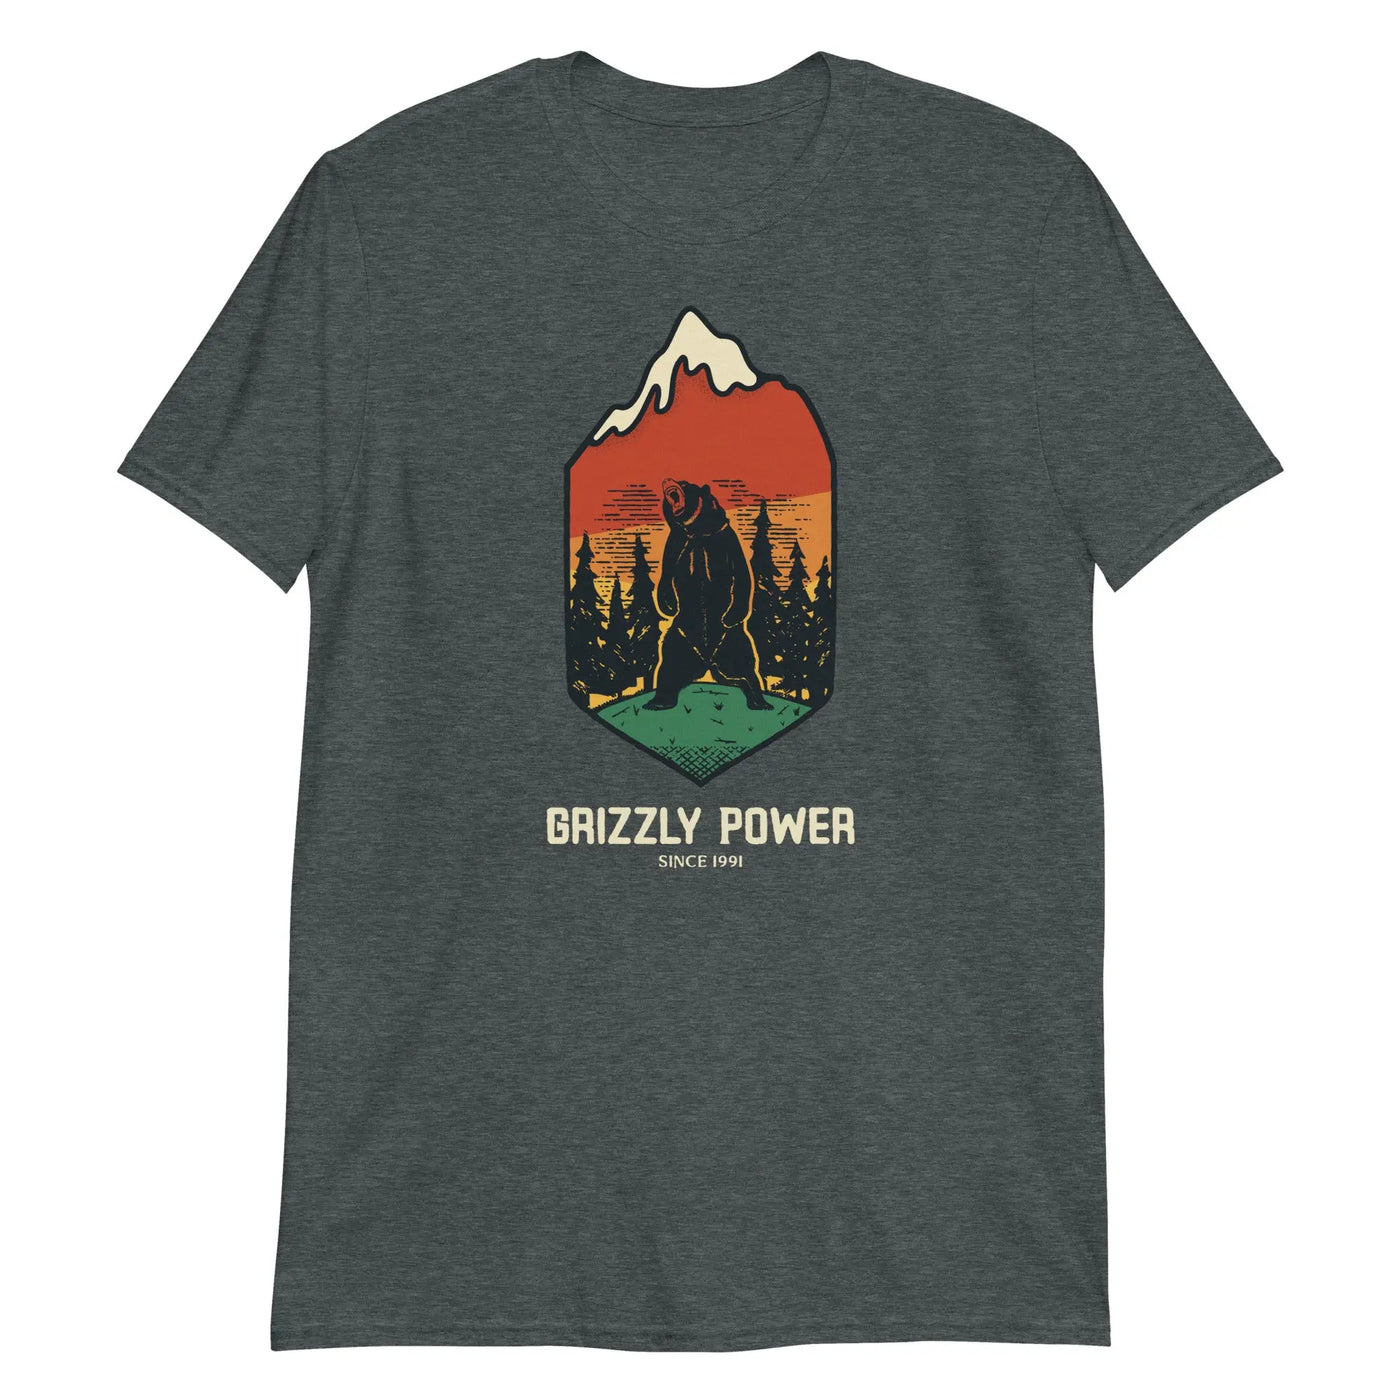 Grizzly Power Unisex T-Shirt